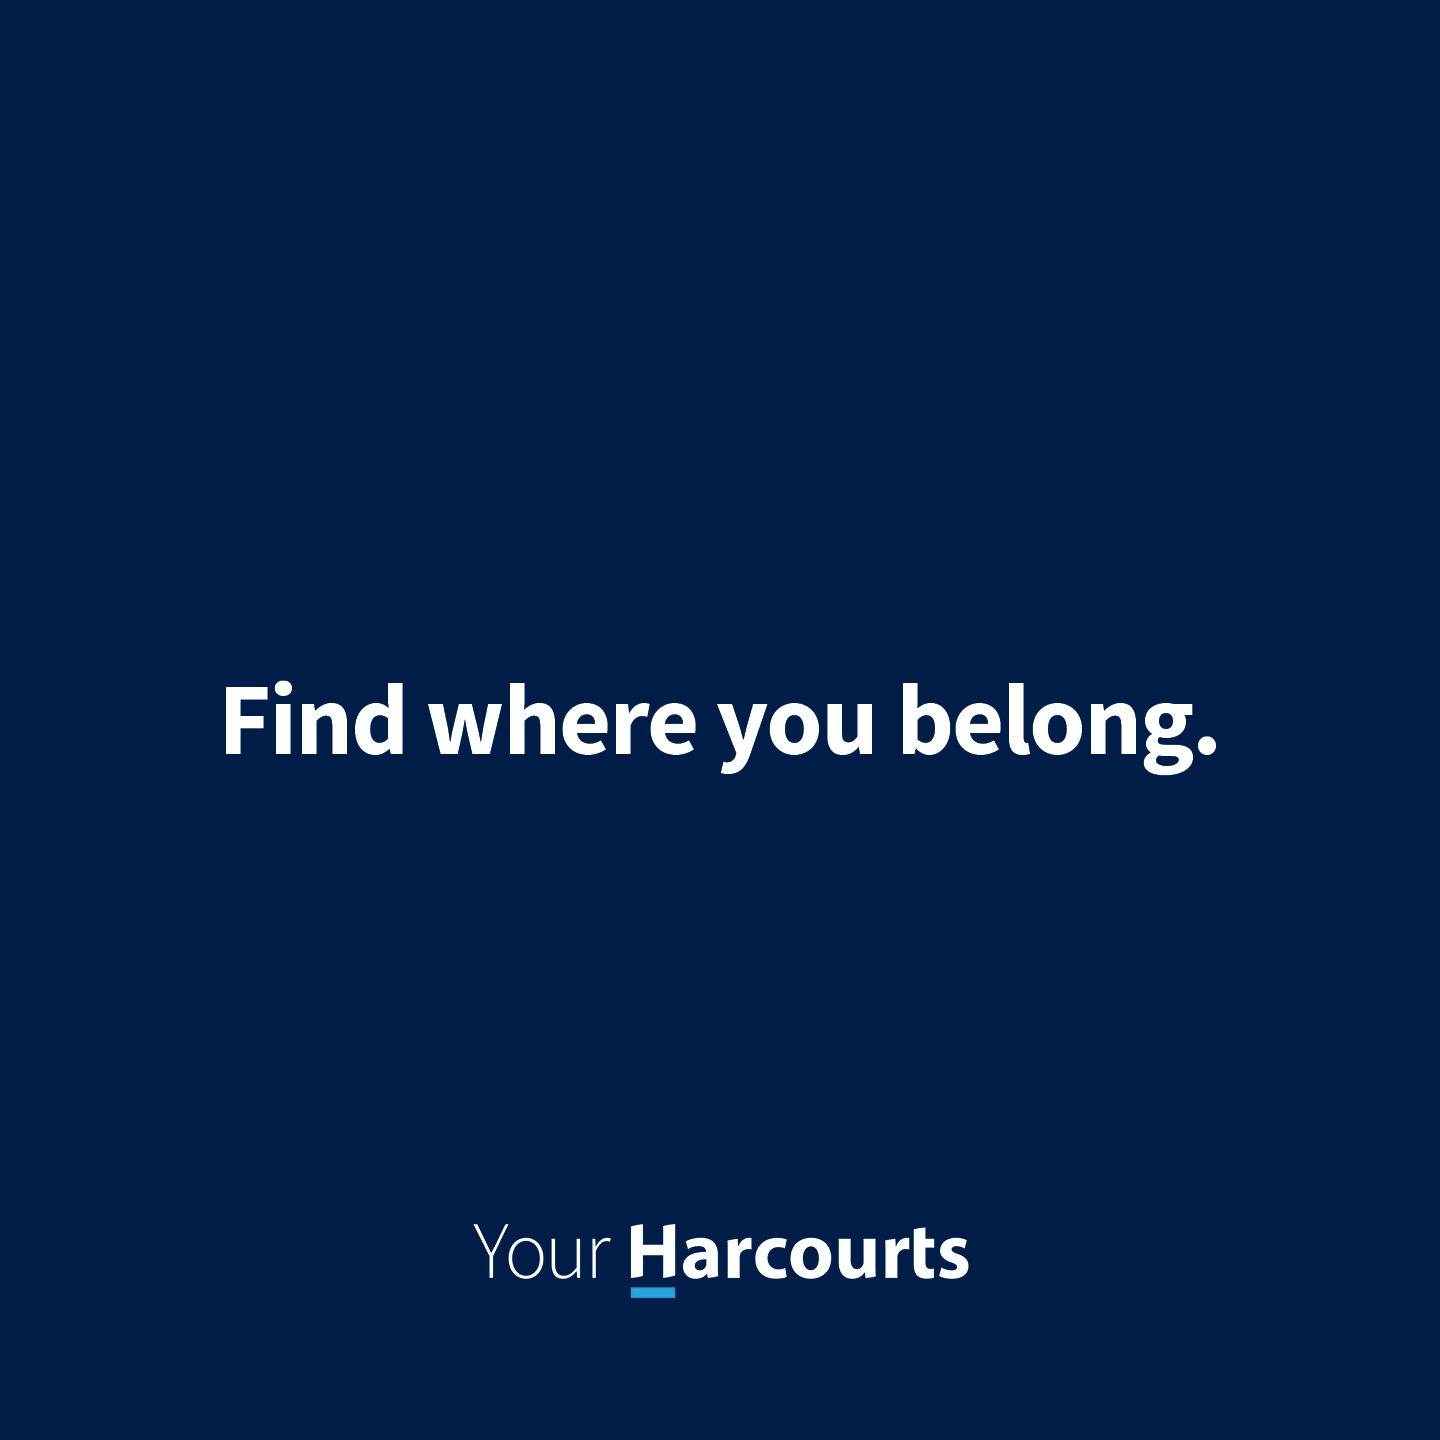 Your Harcourts. Find where you belong.